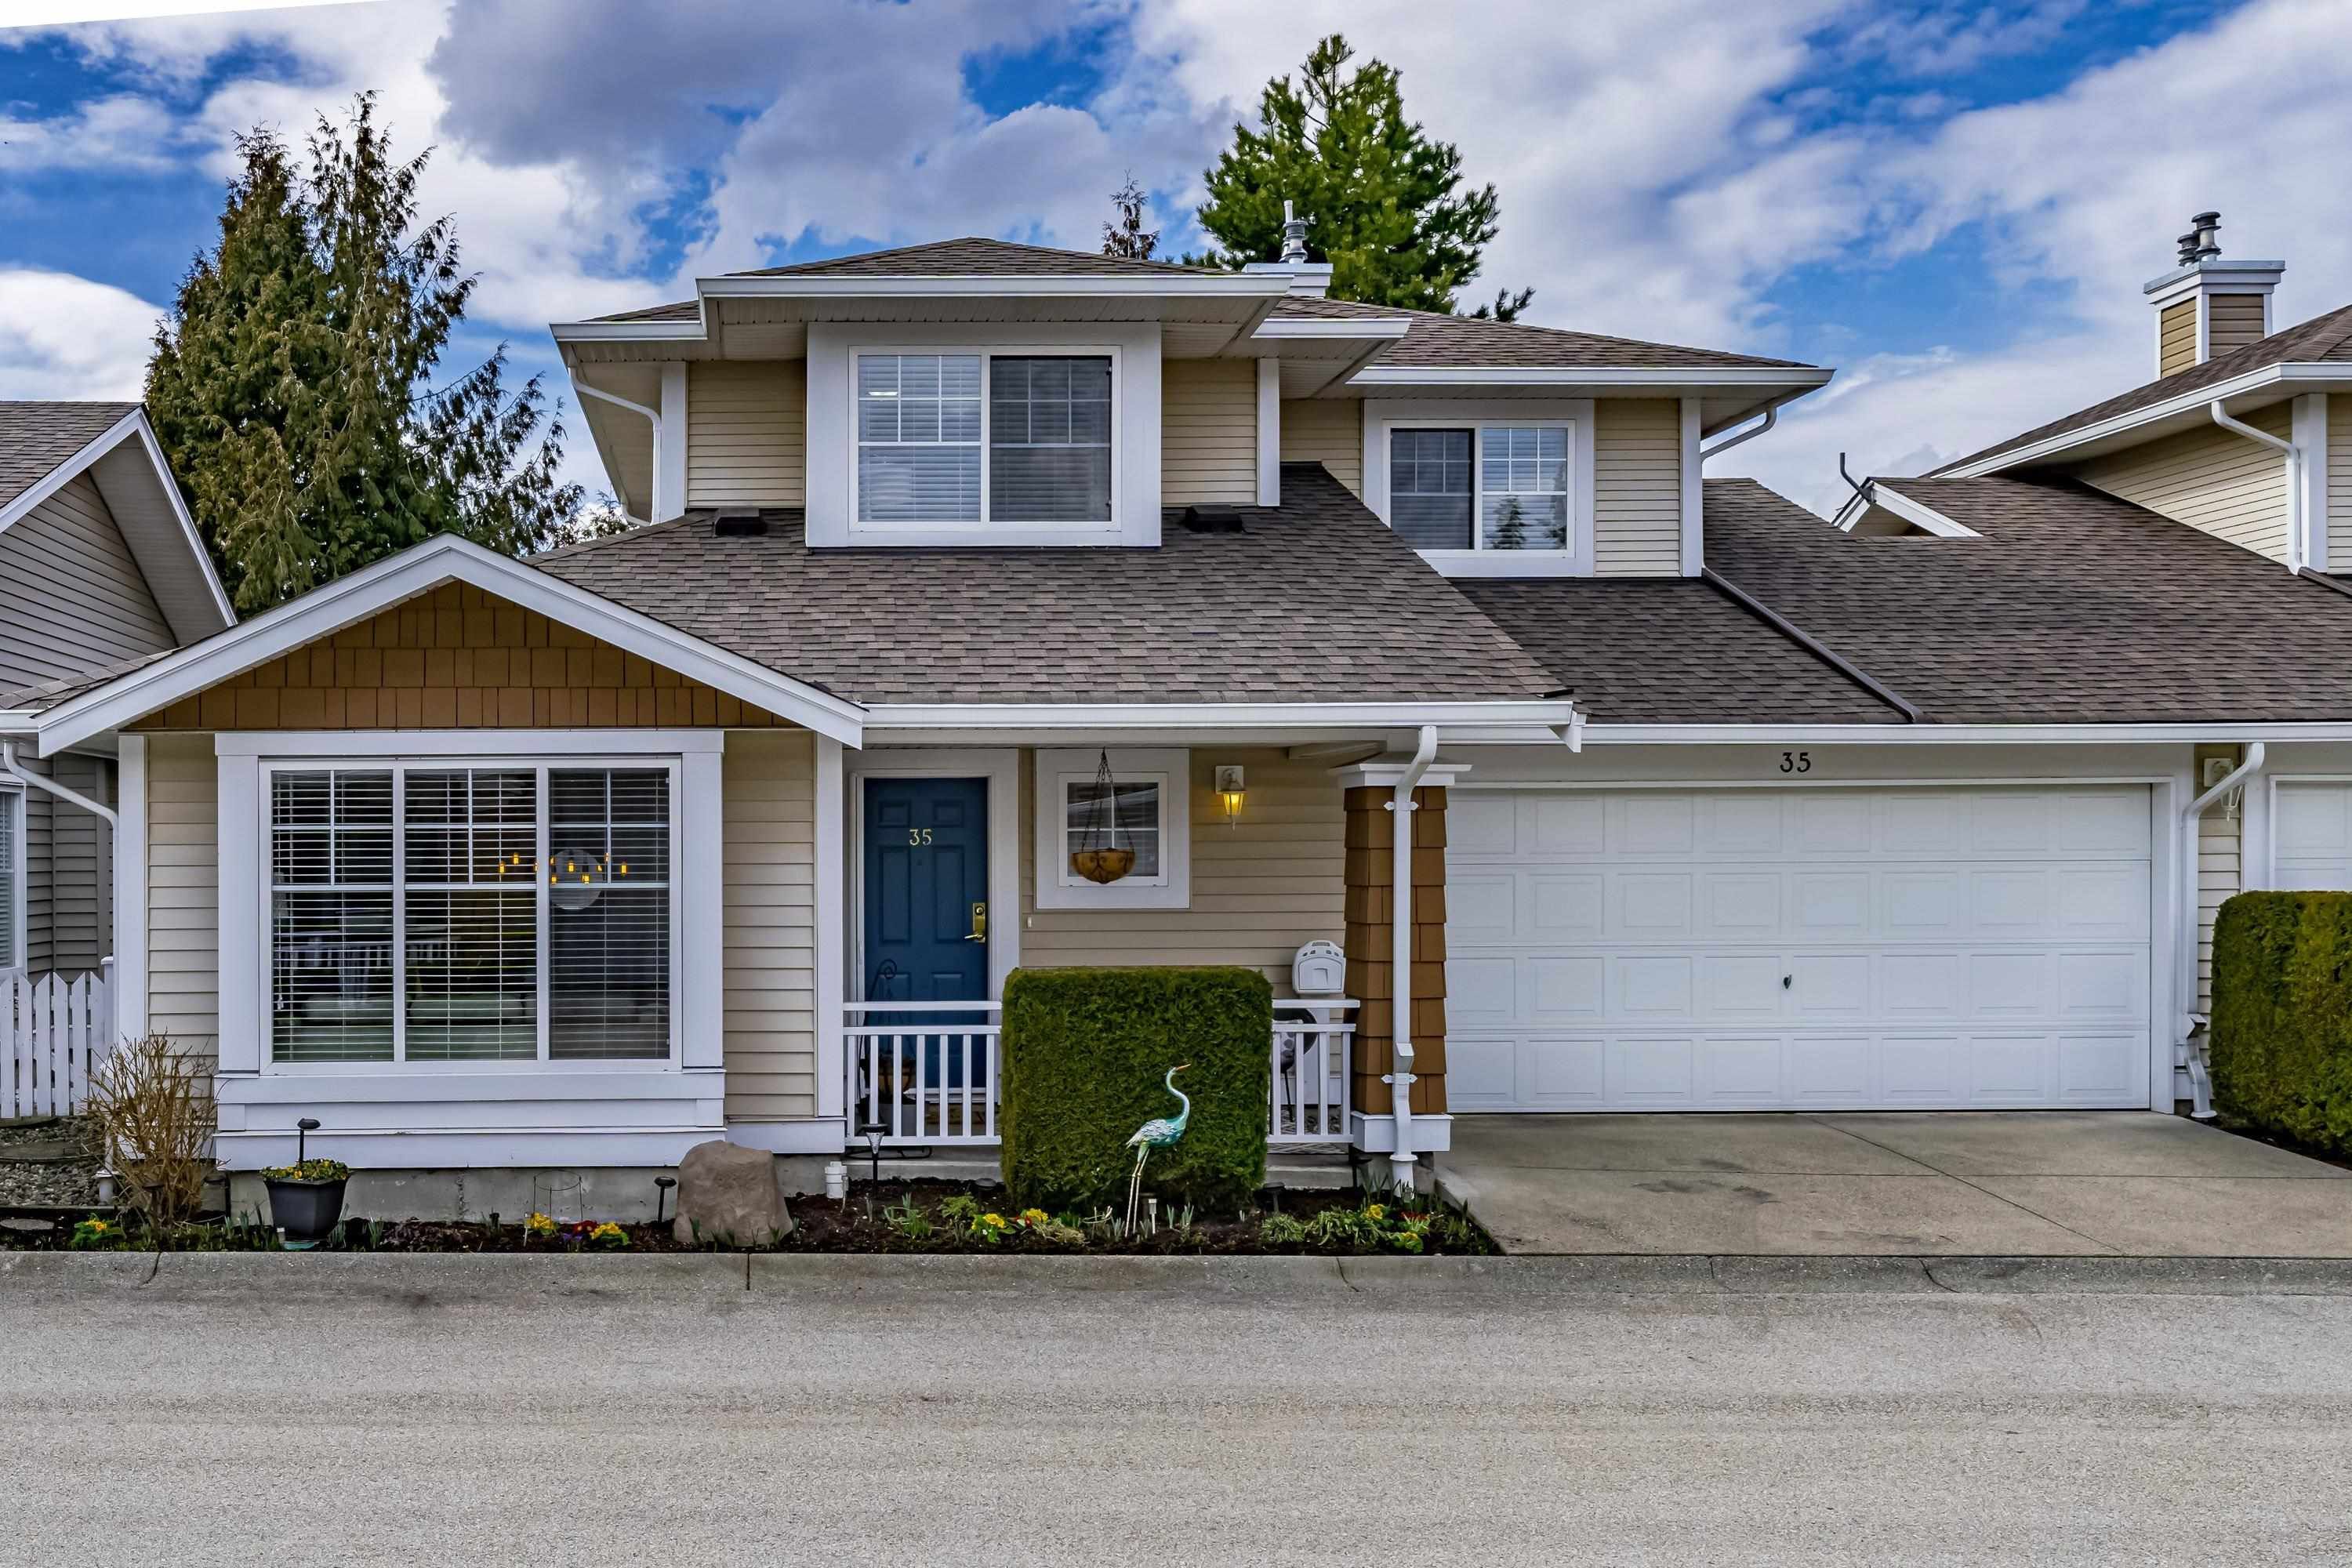 We have sold a property at 35 6885 184 ST in Surrey